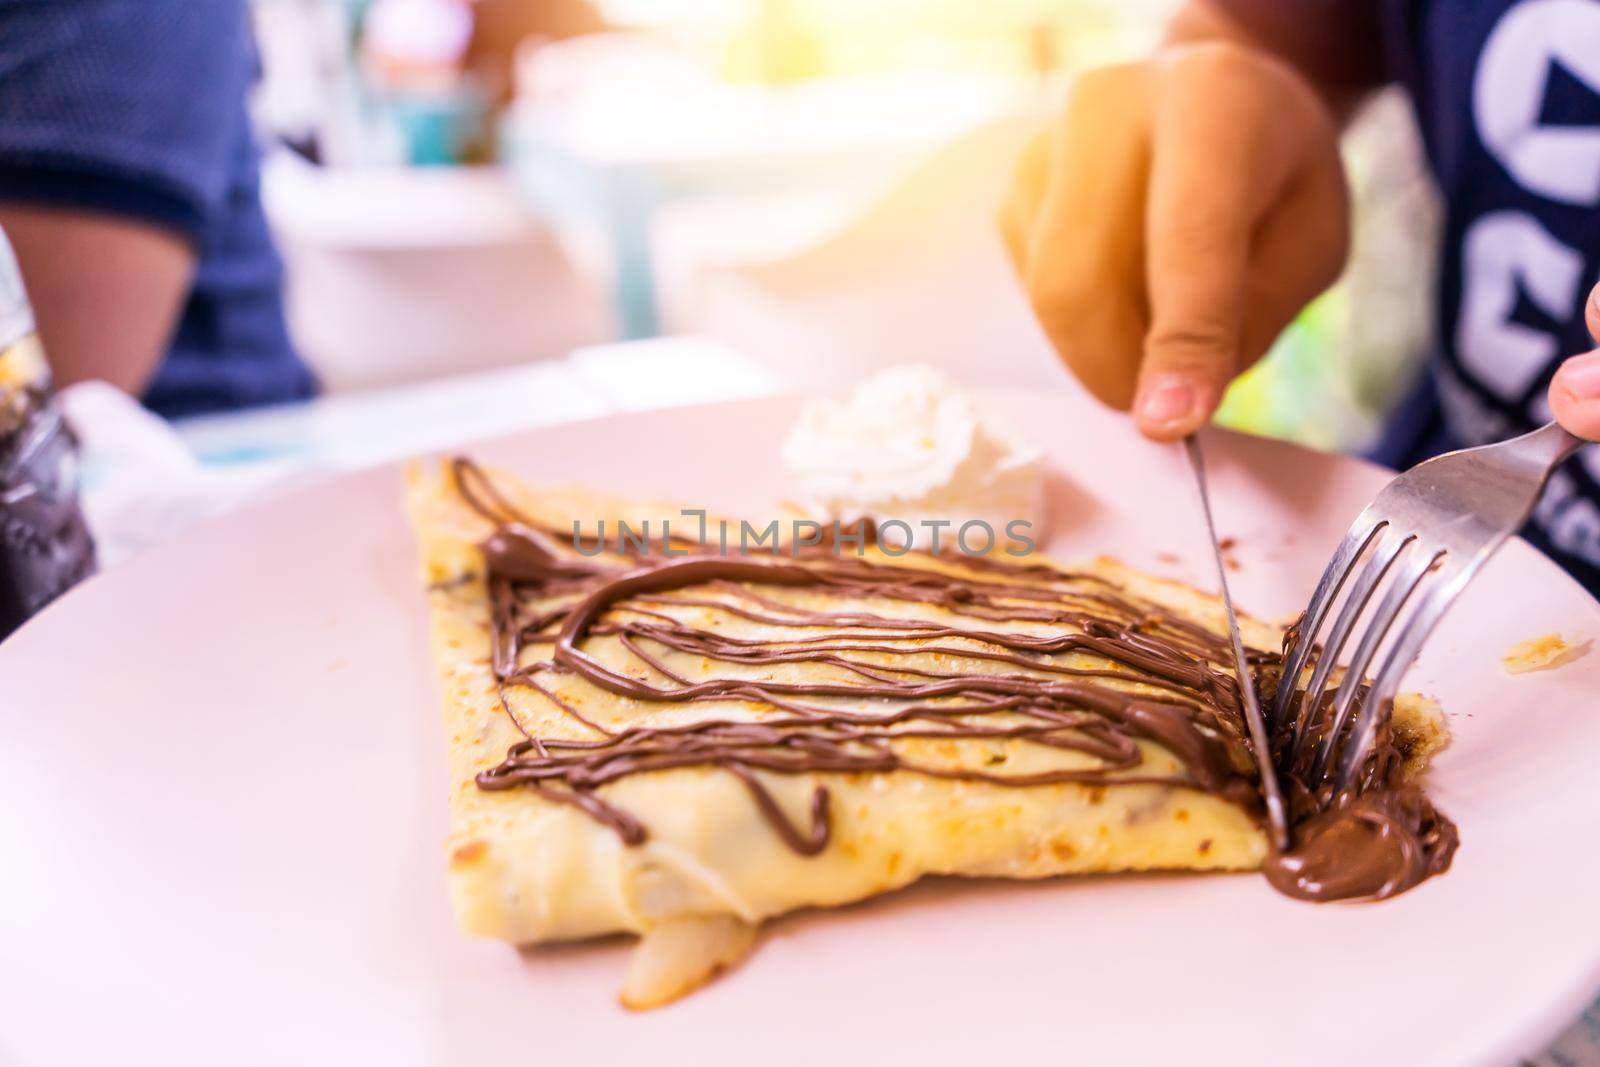 Closeup to the hands of a boy eating crepes with chocolate in Jinotega Nicaragua